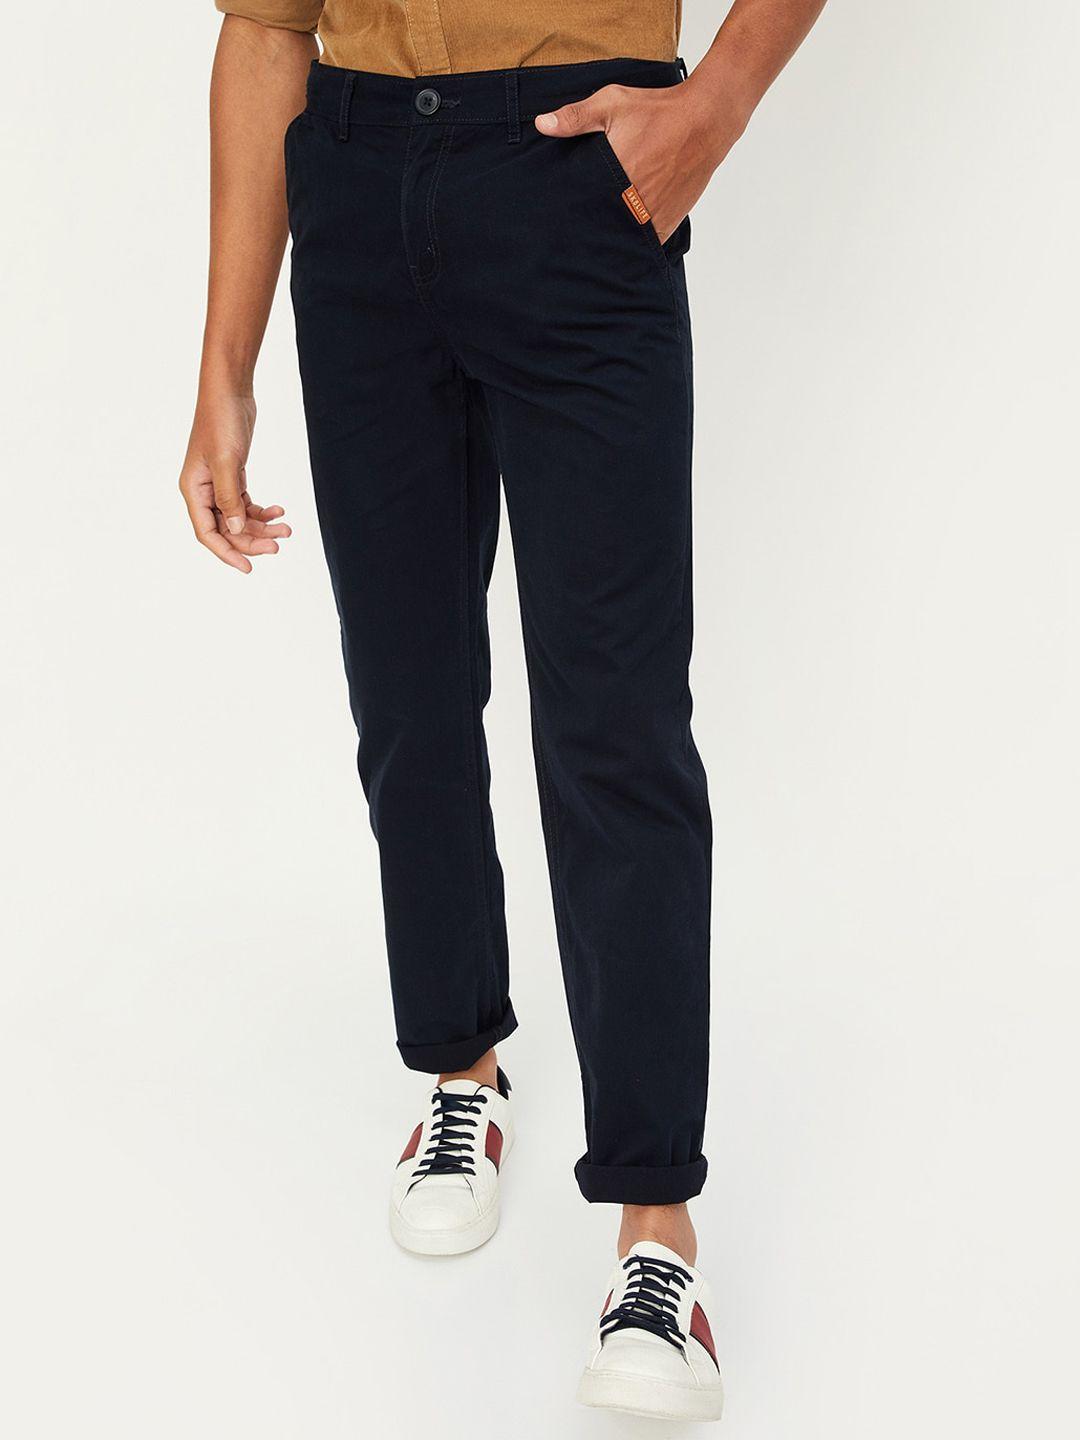 max-boys-pure-cotton-mid-rise-trousers